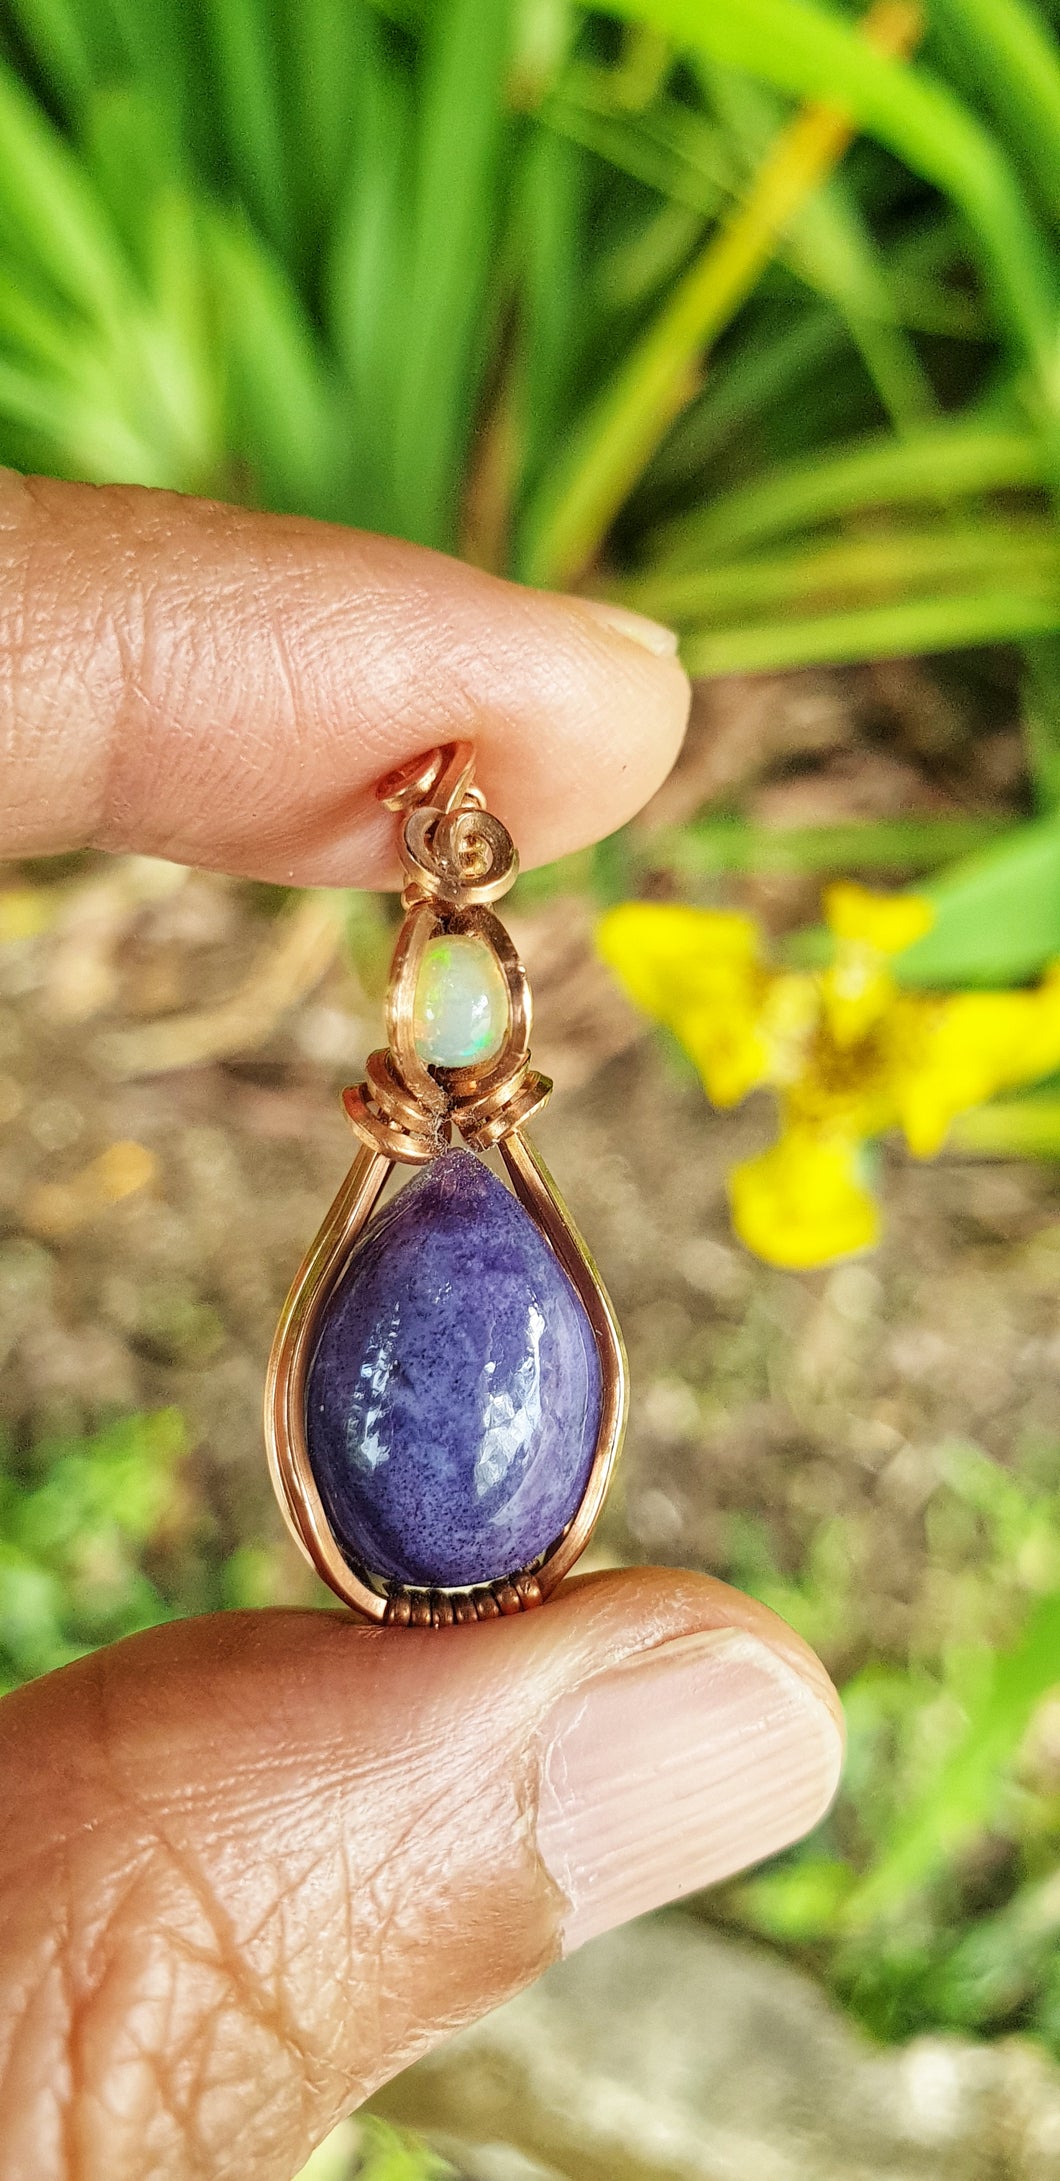 Morado Opal Cabochon Gemstone Accented with a Small Round Ethiopian Opal at the Bail Wire Wrapped Pendant/Necklace